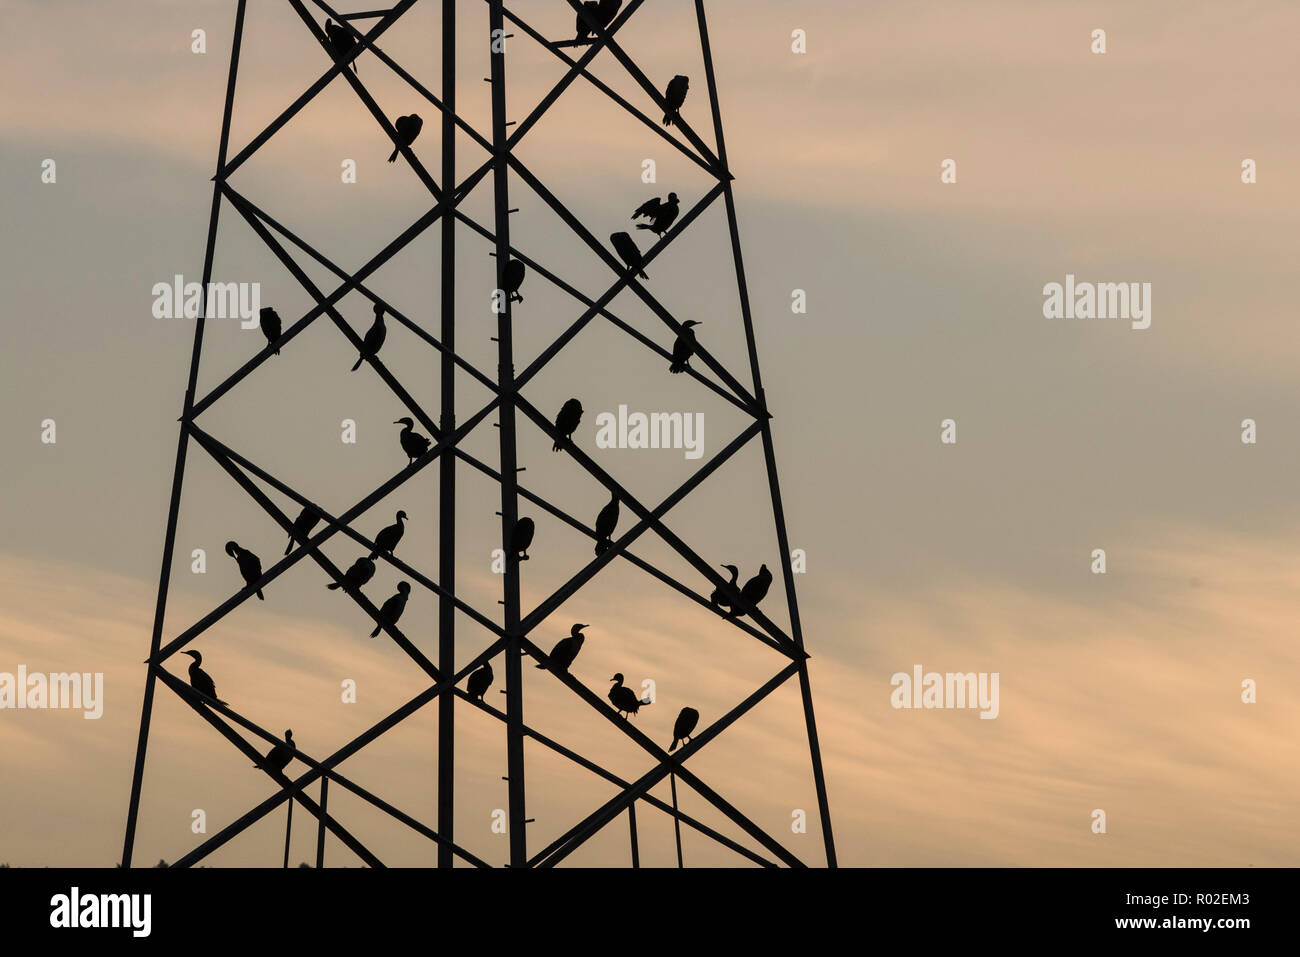 A group of double crested cormorants nesting on a electrical tower near San Francisco Bay, an example of how wildlife adapts to a changing environment Stock Photo